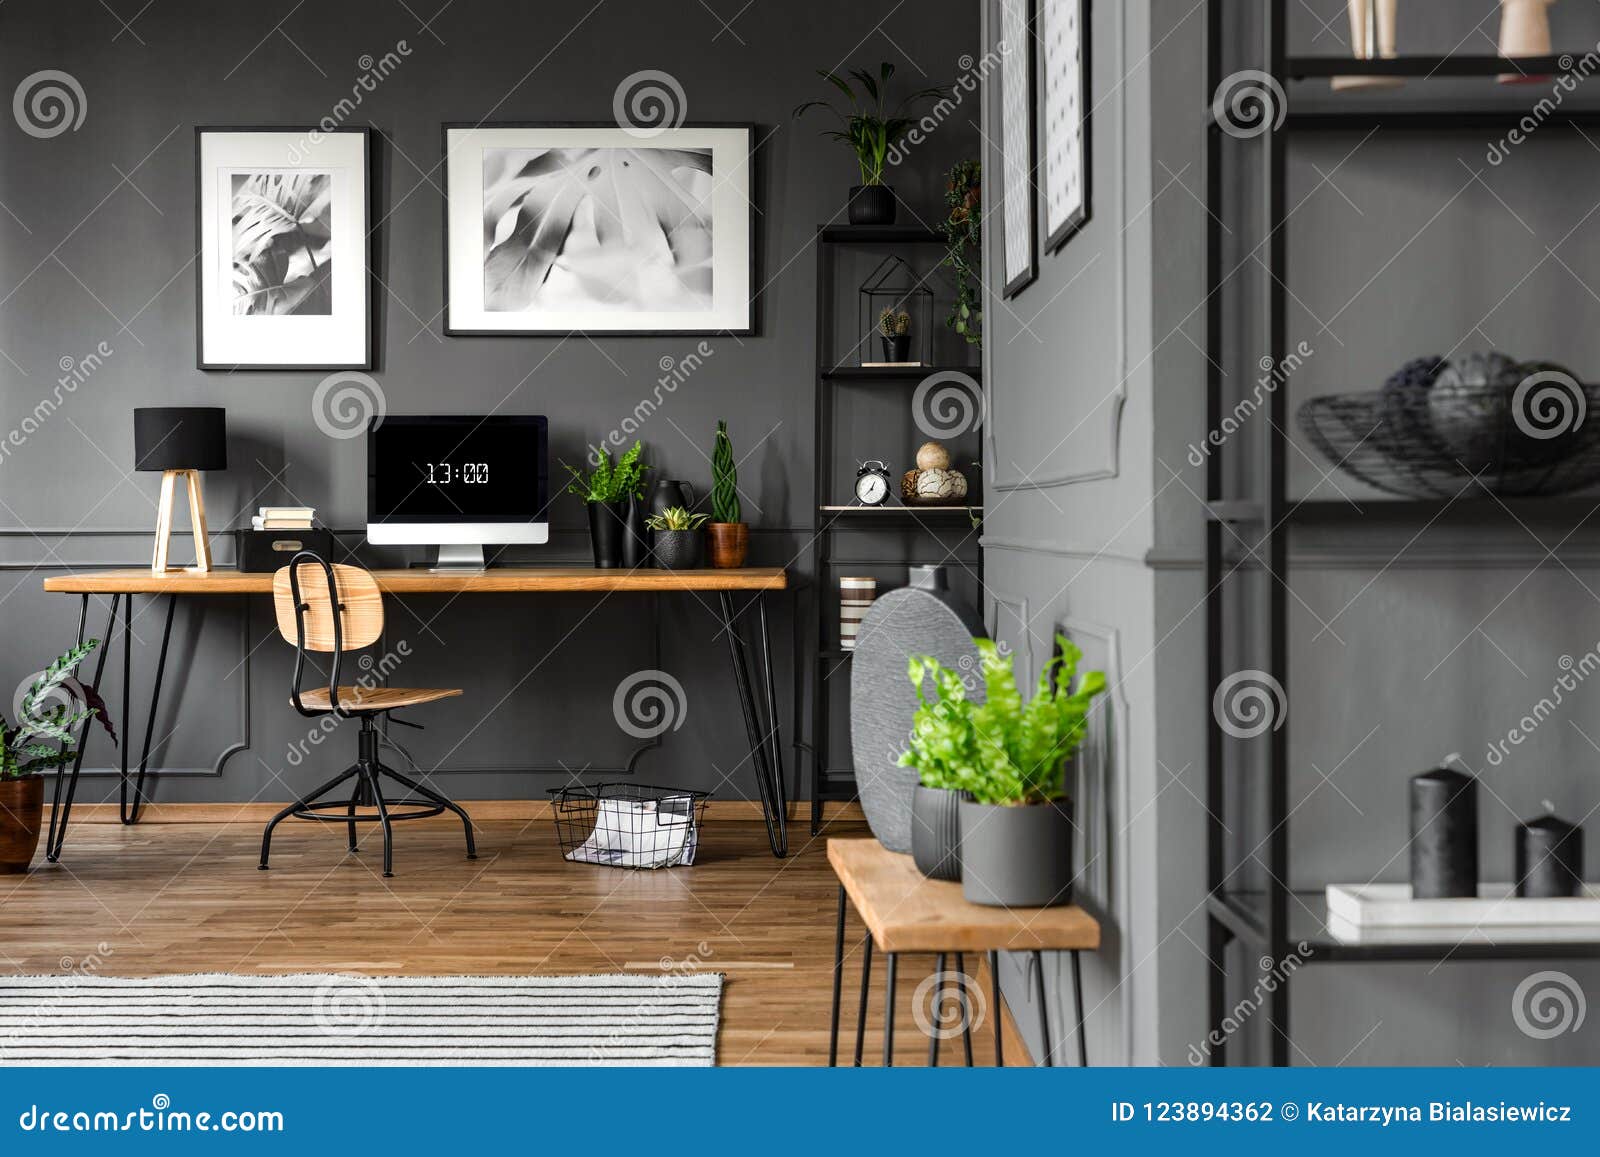 Grey Home Office Interior Plants Wooden Table Posters Above Desk Computer Monitor 123894362 